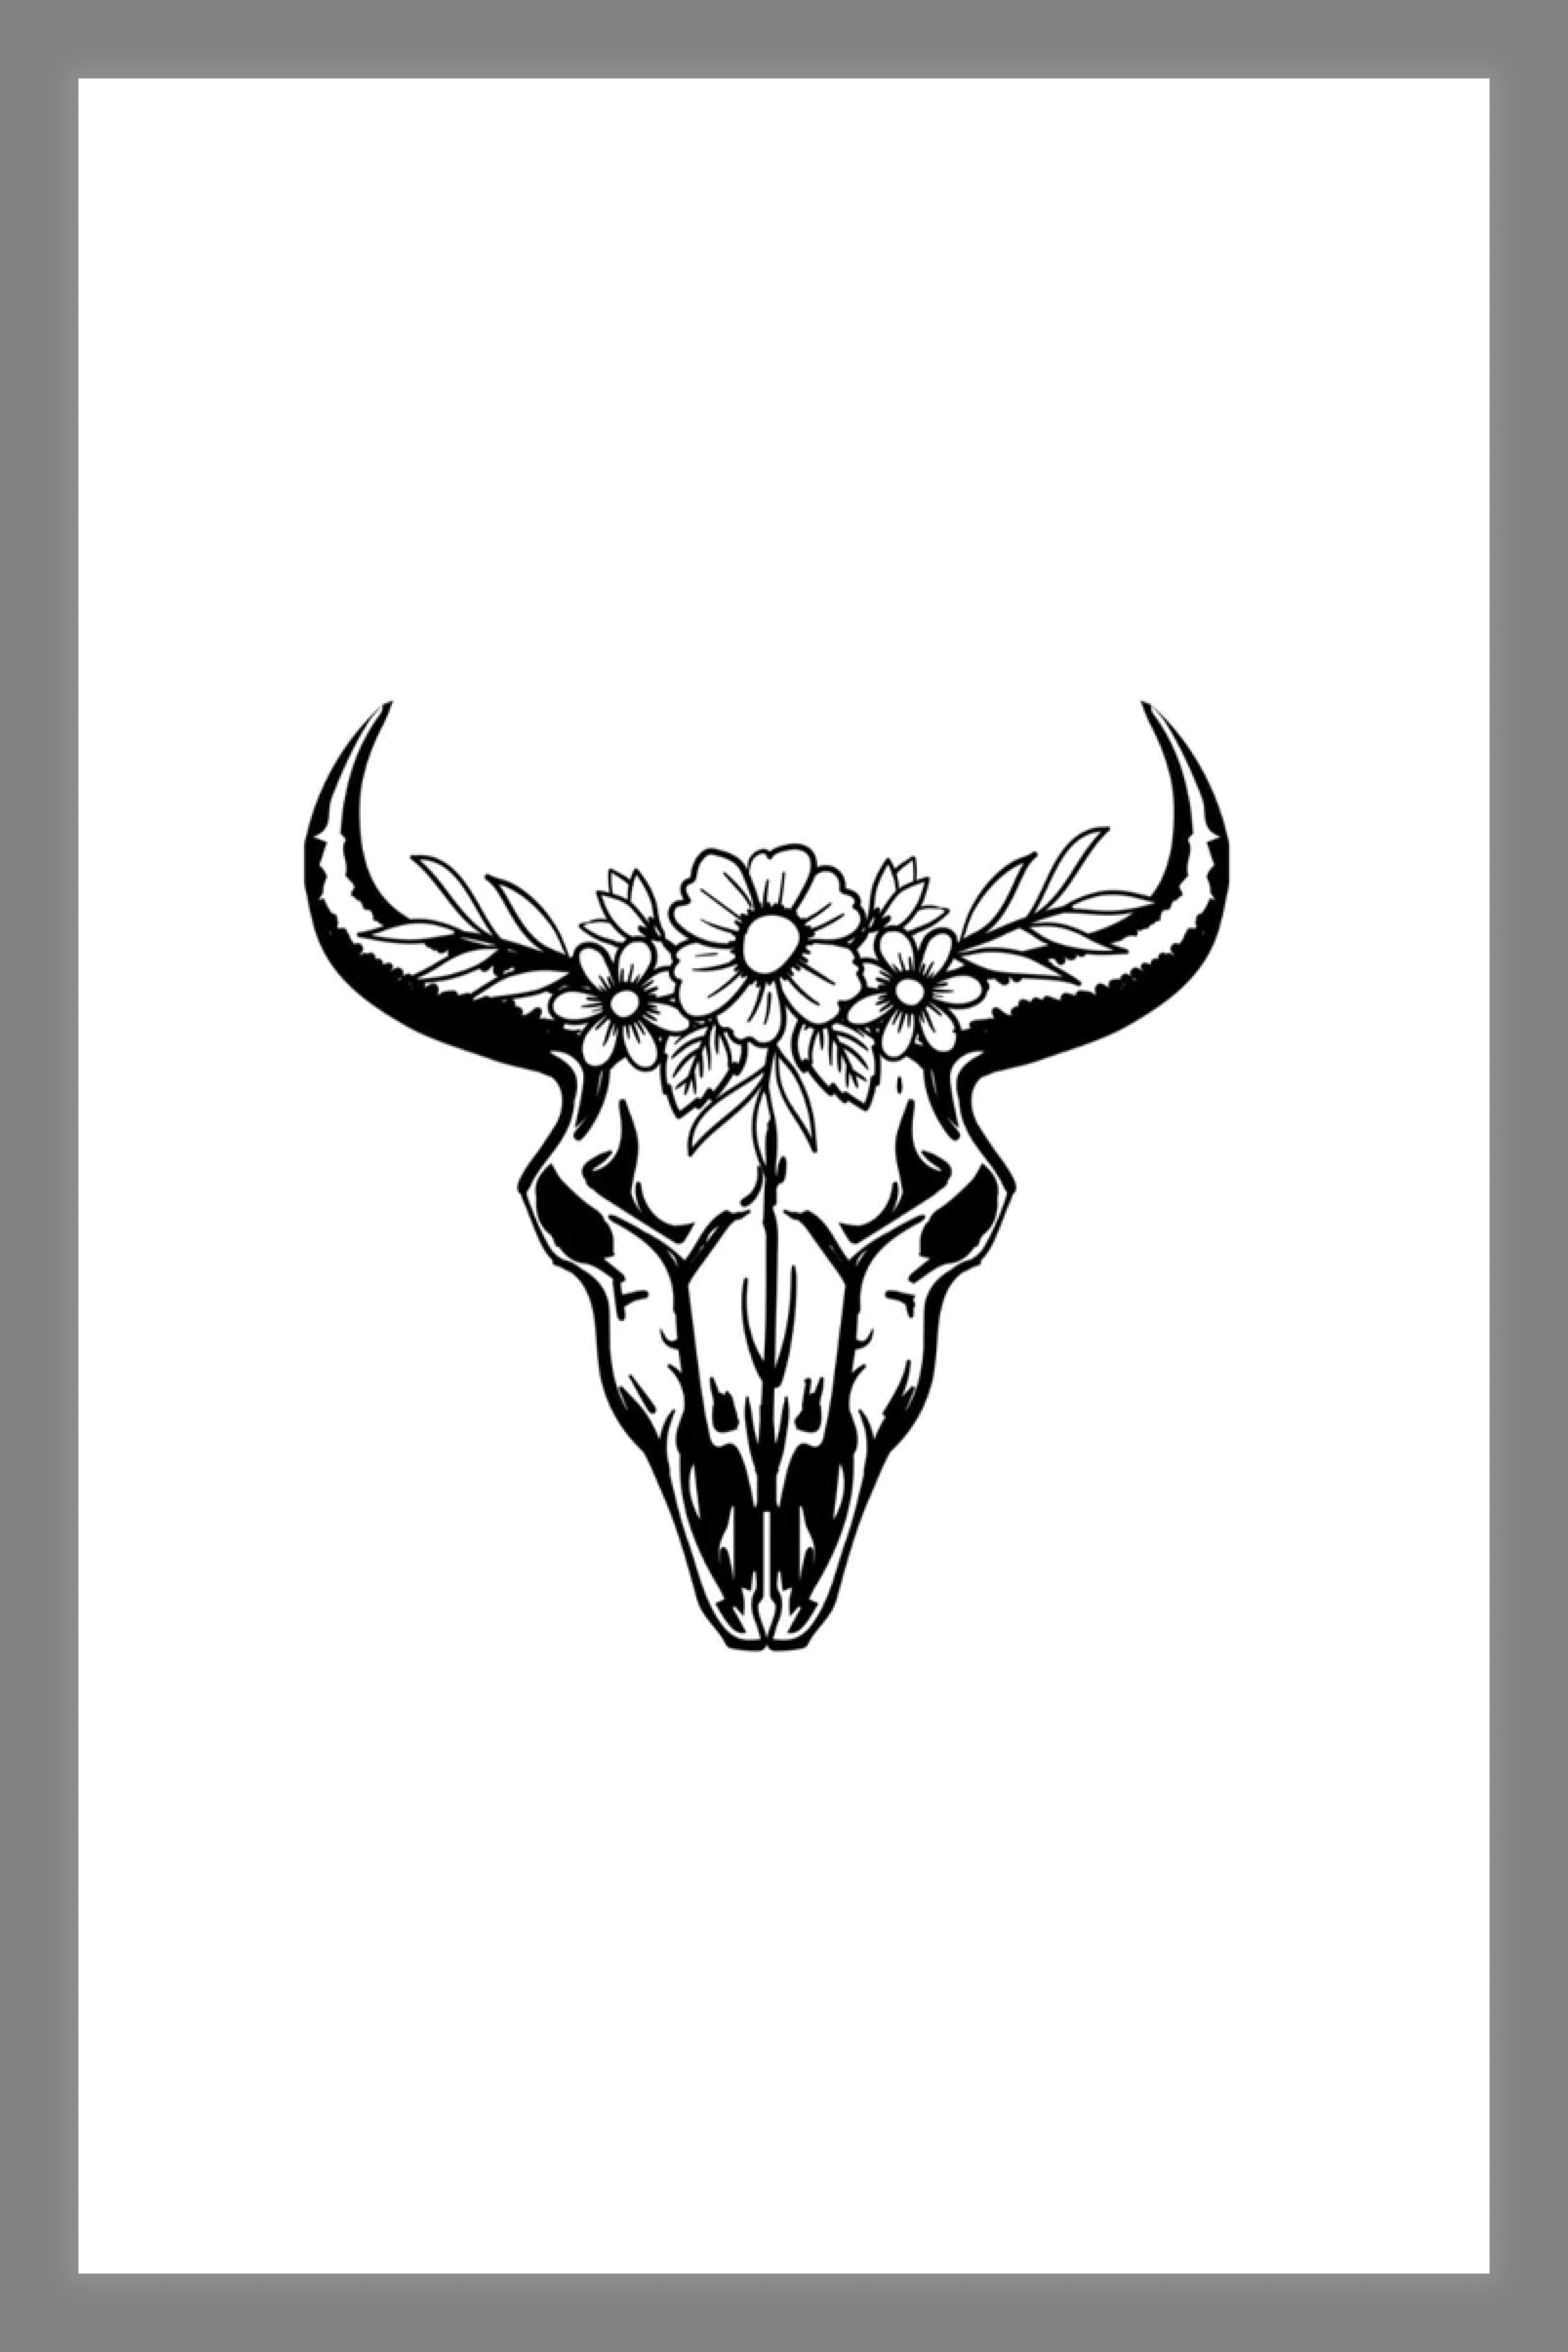 Image of a bull skull with flowers and branches on the forehead.